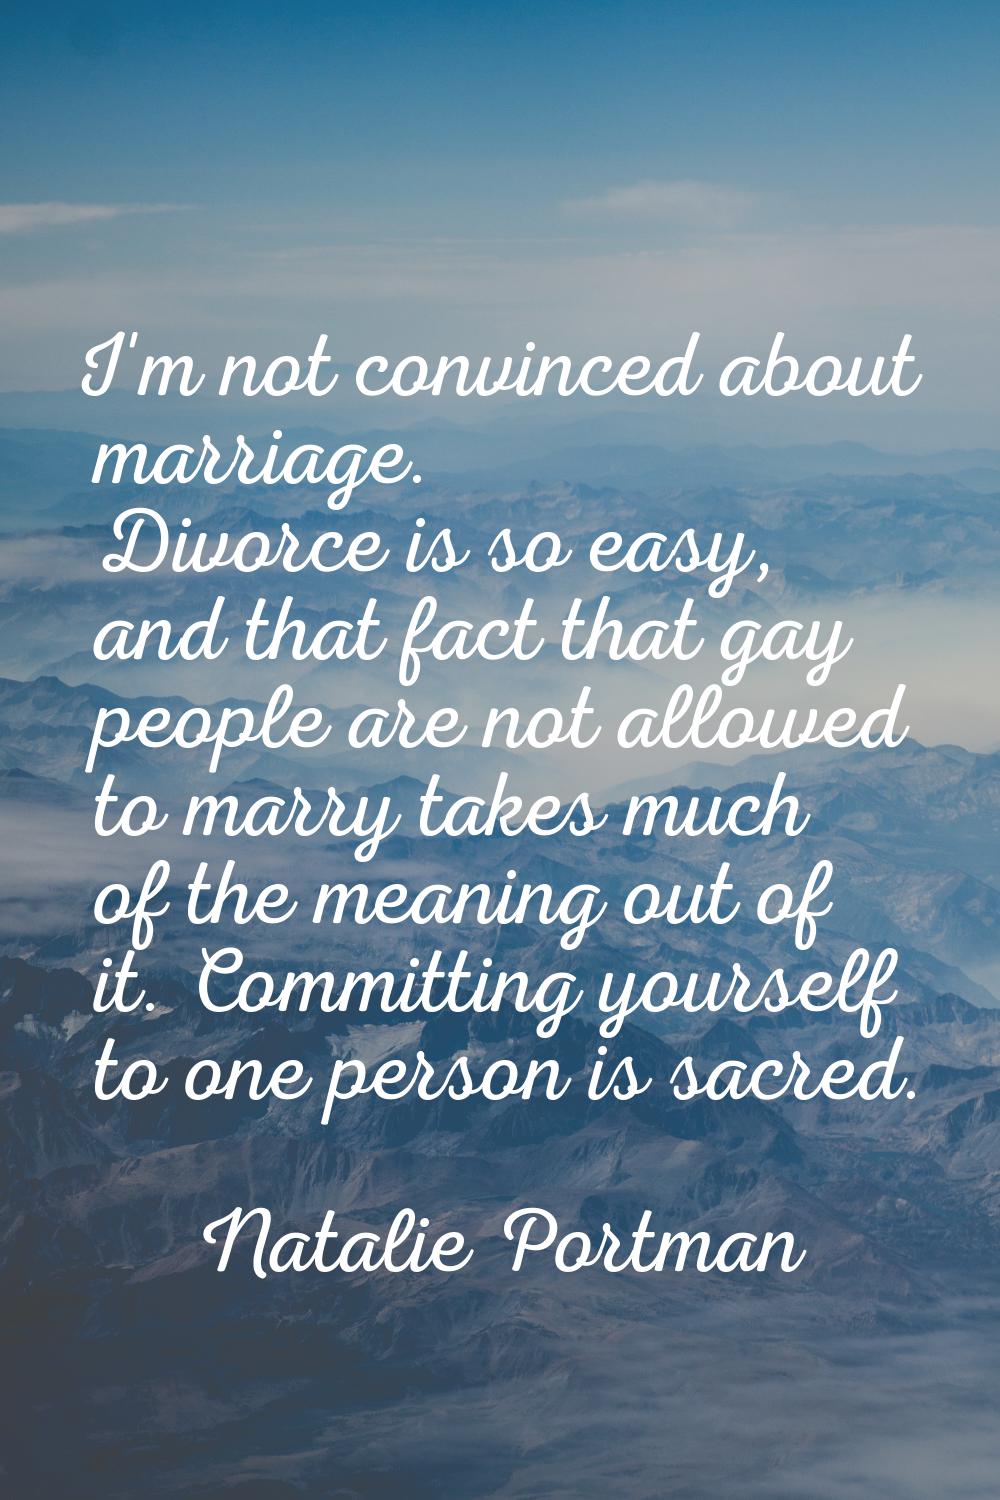 I'm not convinced about marriage. Divorce is so easy, and that fact that gay people are not allowed